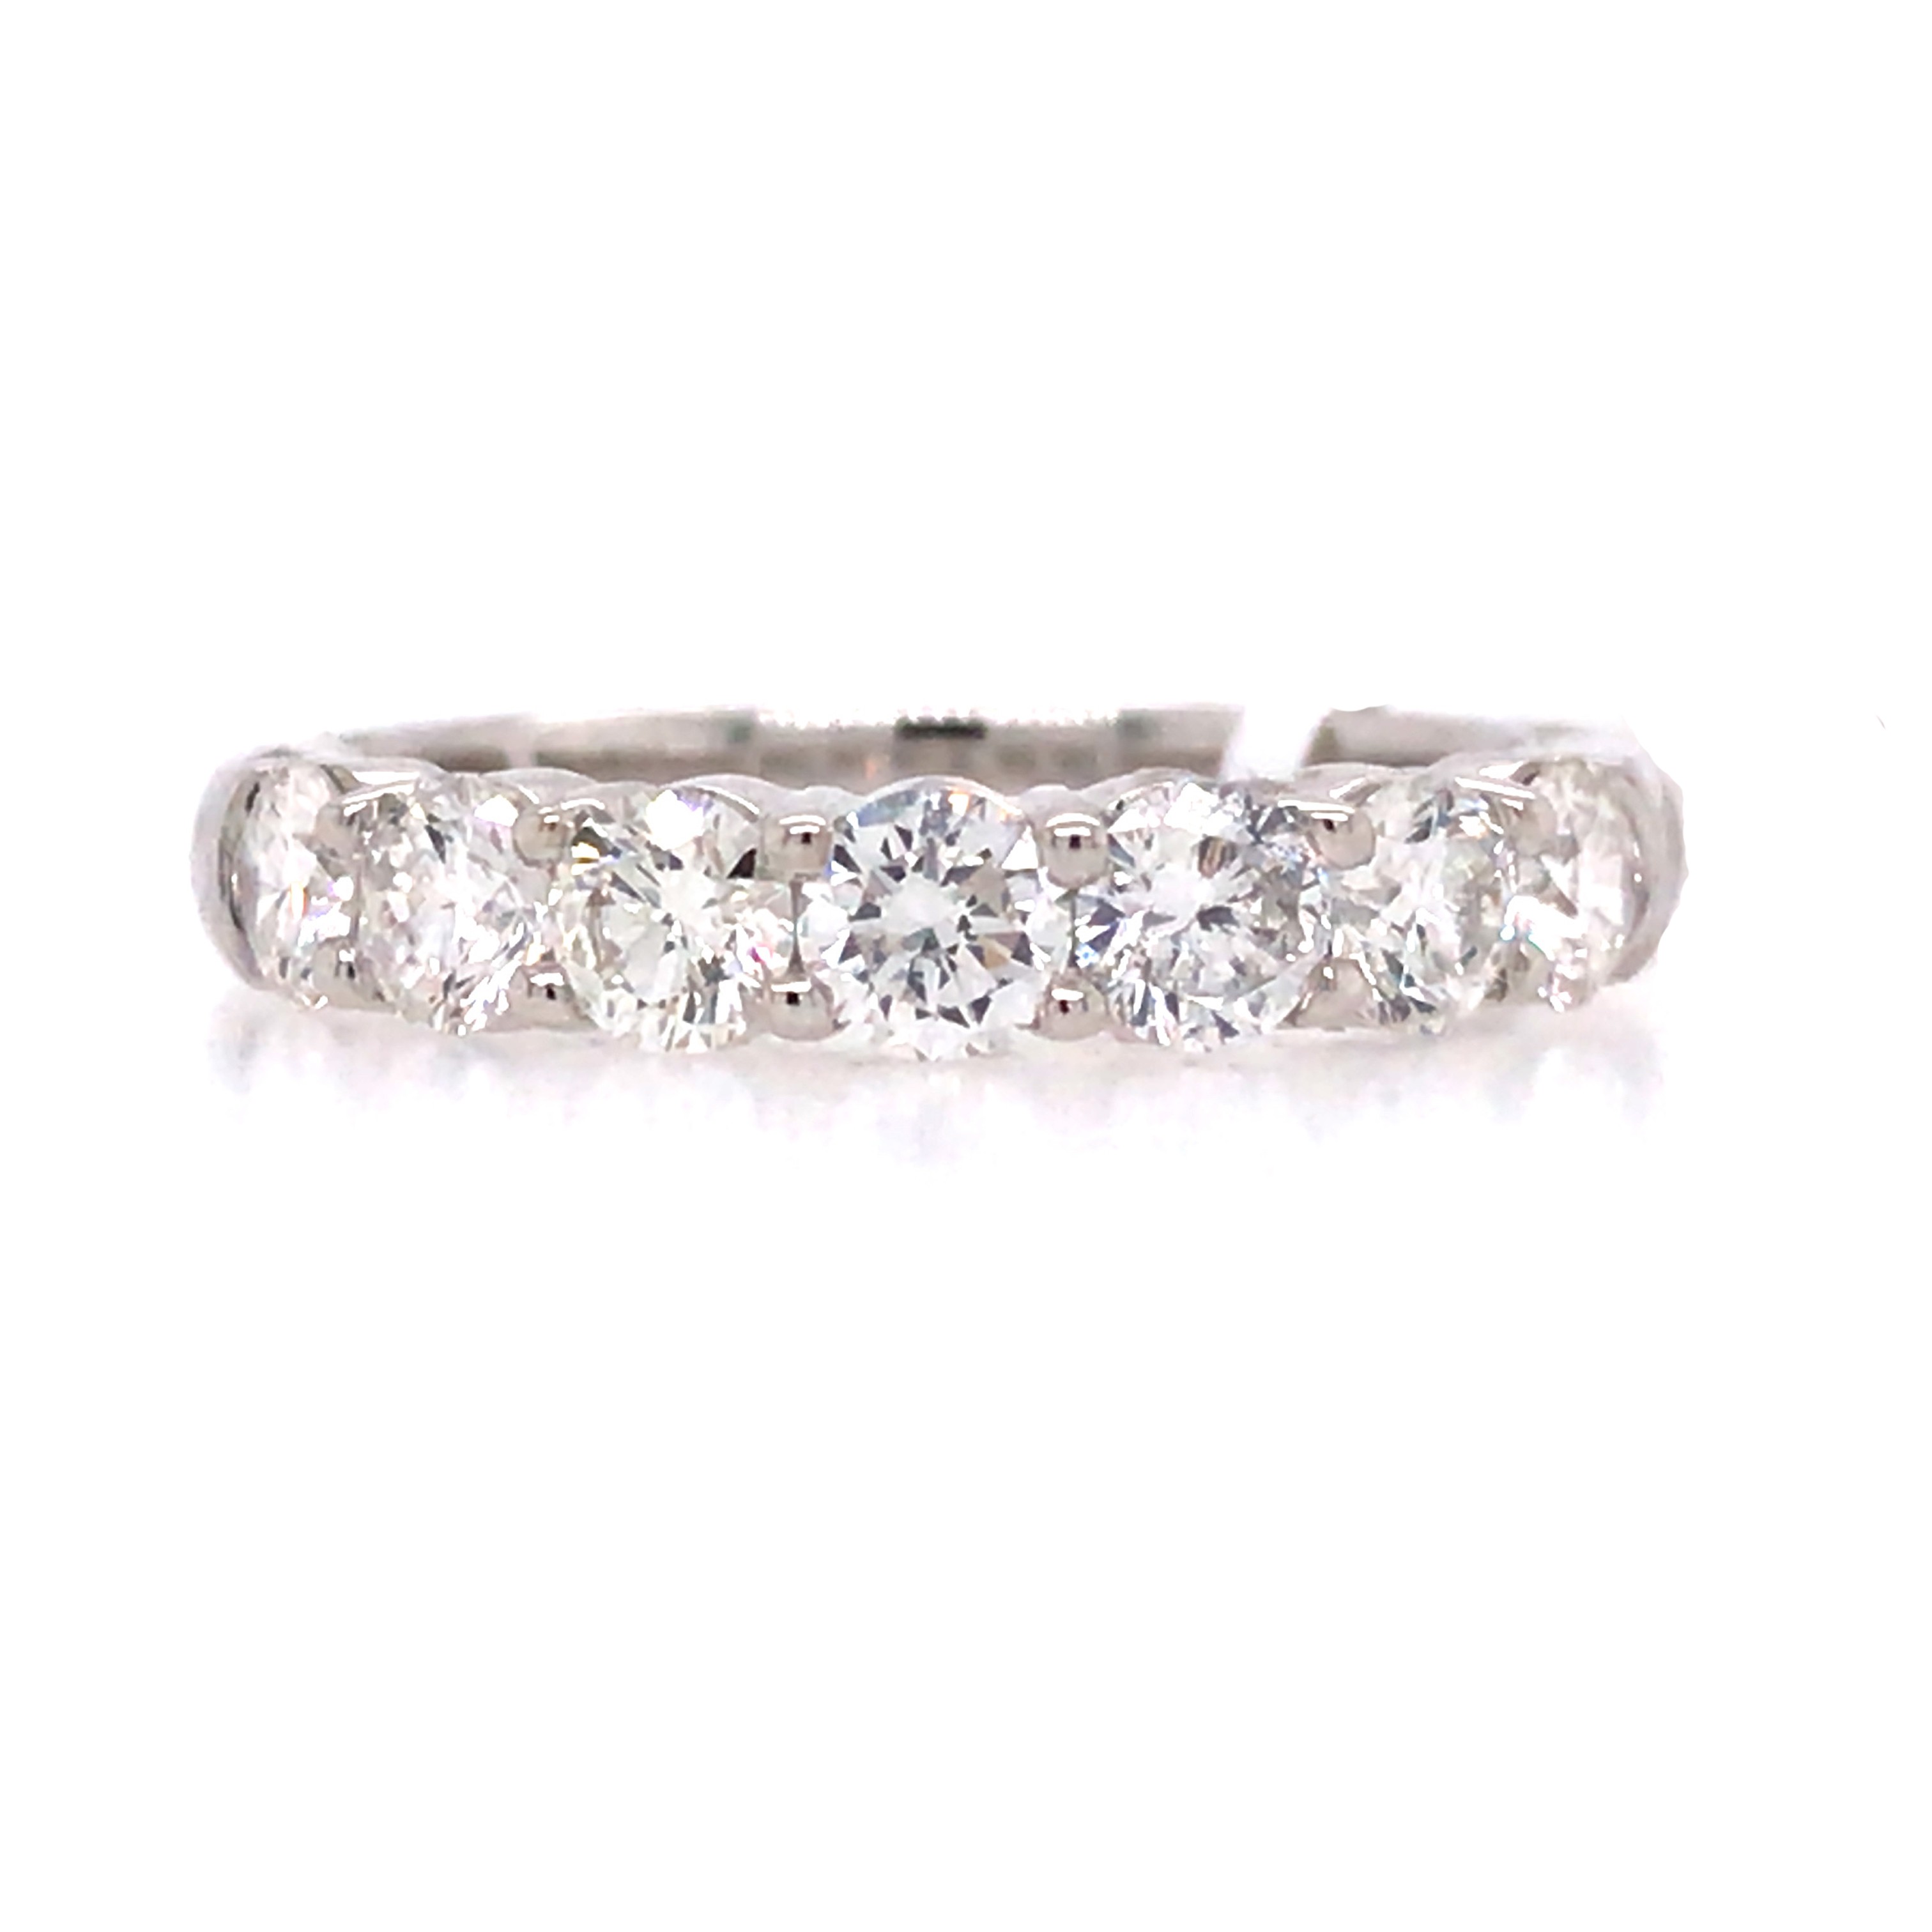 White Gold WEDDING Band WITH 7 Diamonds - Simmons Fine Jewelry